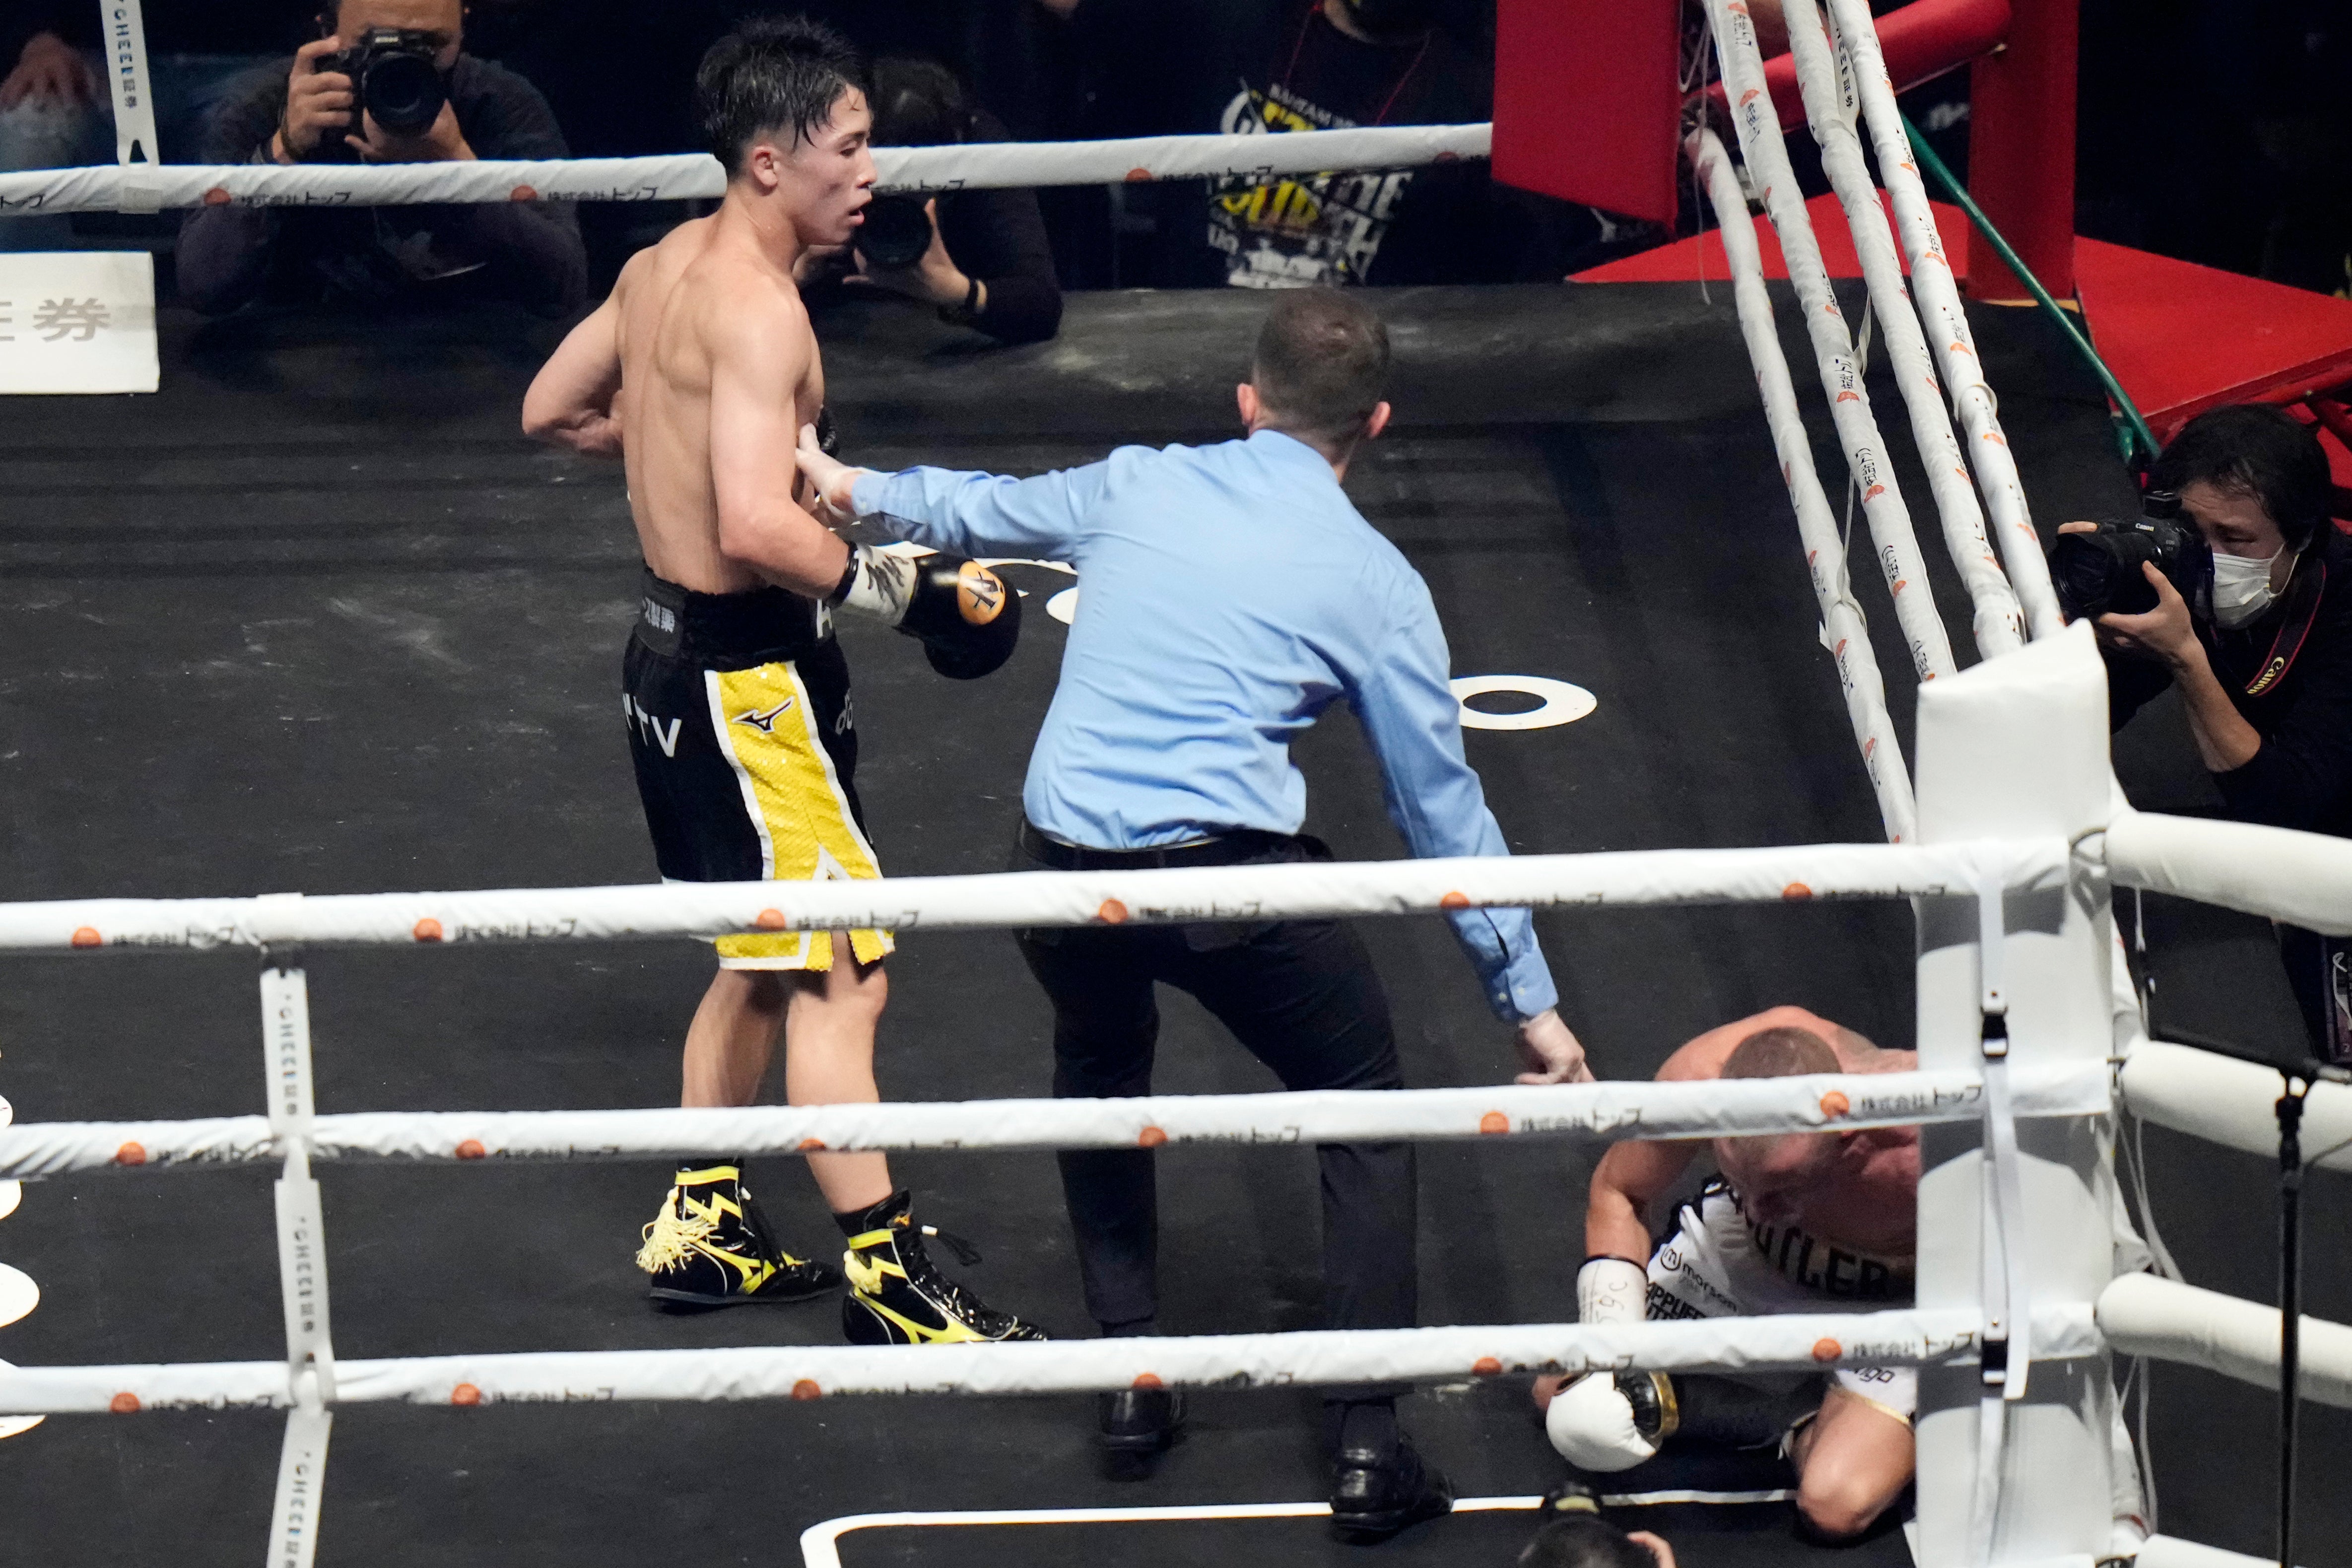 Inoue finally floored and finished Butler in the 11th round